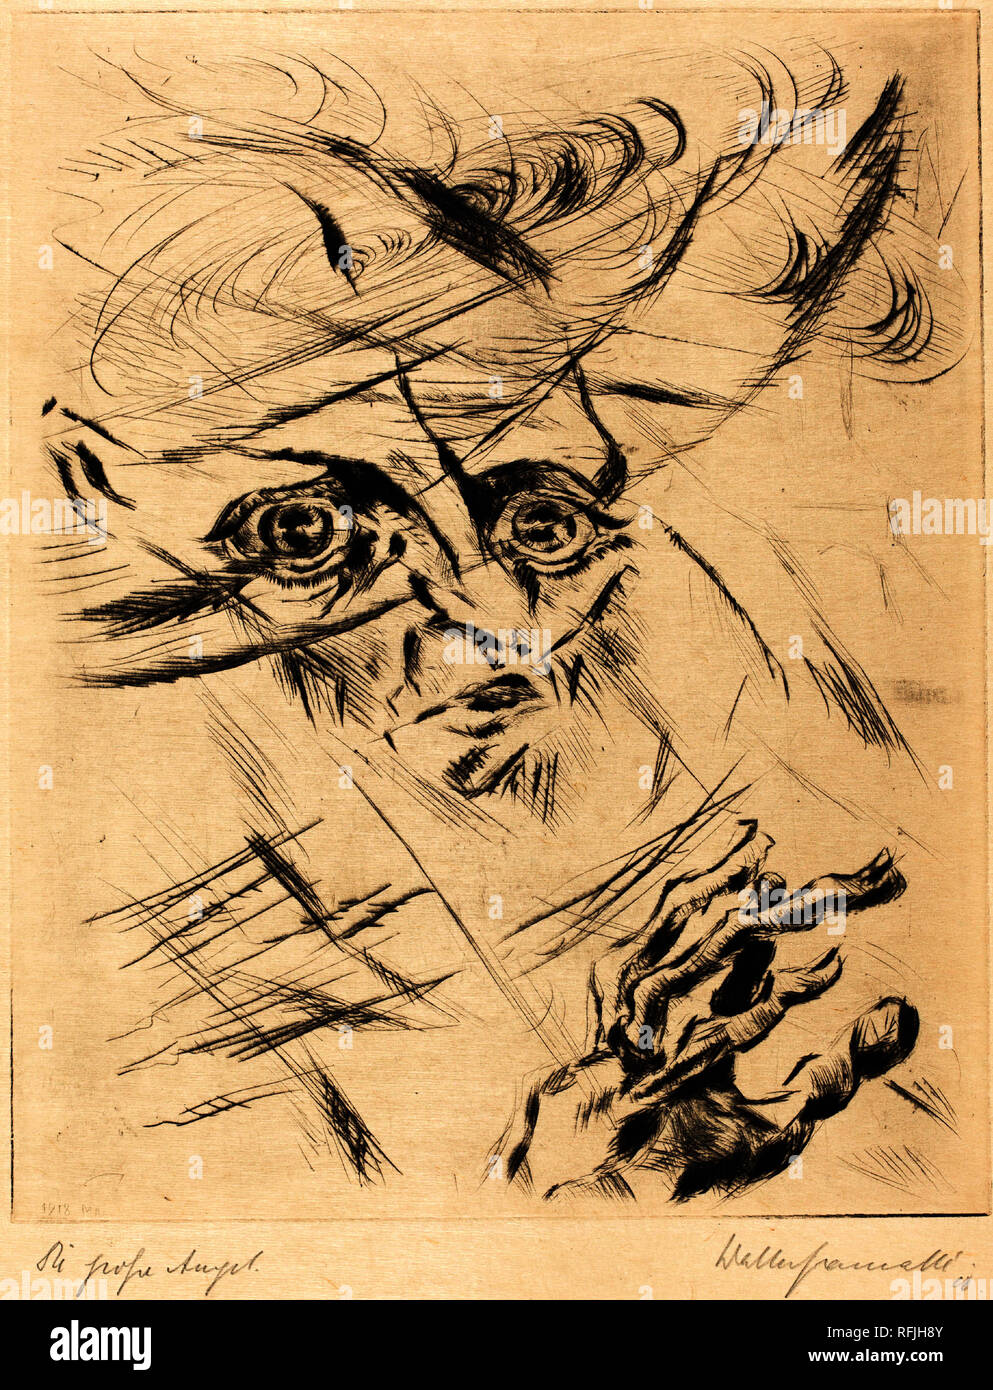 Die Grosse Angst (The Great Anxiety). Dated: 1918. Dimensions: plate: 29.9 x 24.1 cm (11 3/4 x 9 1/2 in.)  sheet: 40.1 x 30.7 cm (15 13/16 x 12 1/16 in.). Medium: drypoint in black on wove paper, similar to japan paper. Museum: National Gallery of Art, Washington DC. Author: Walter Gramatté. Stock Photo